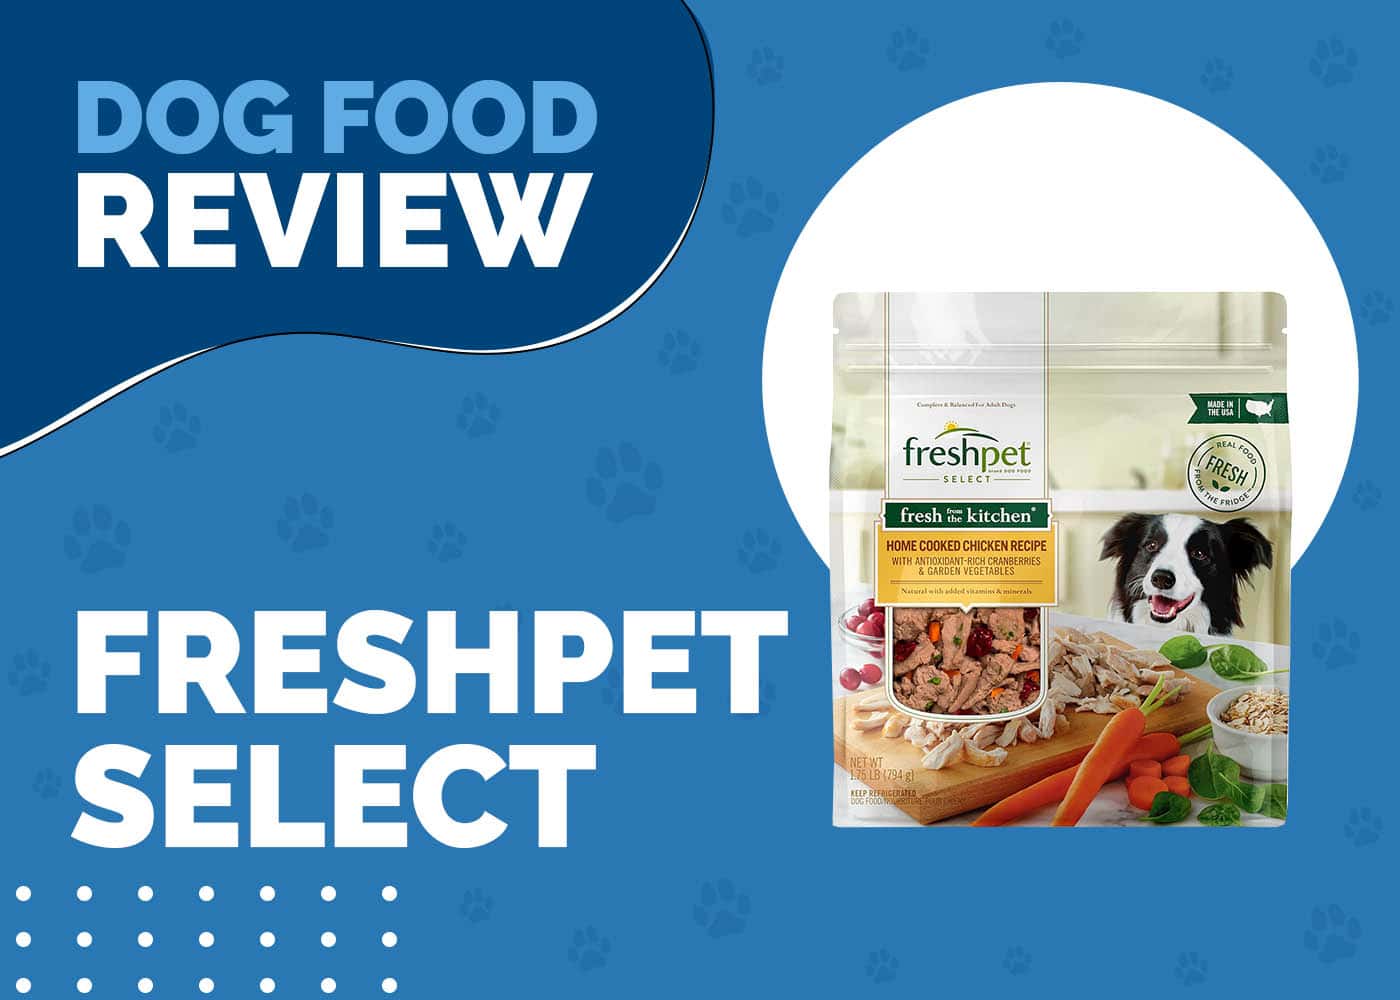 Freshpet Select Dog Food Review